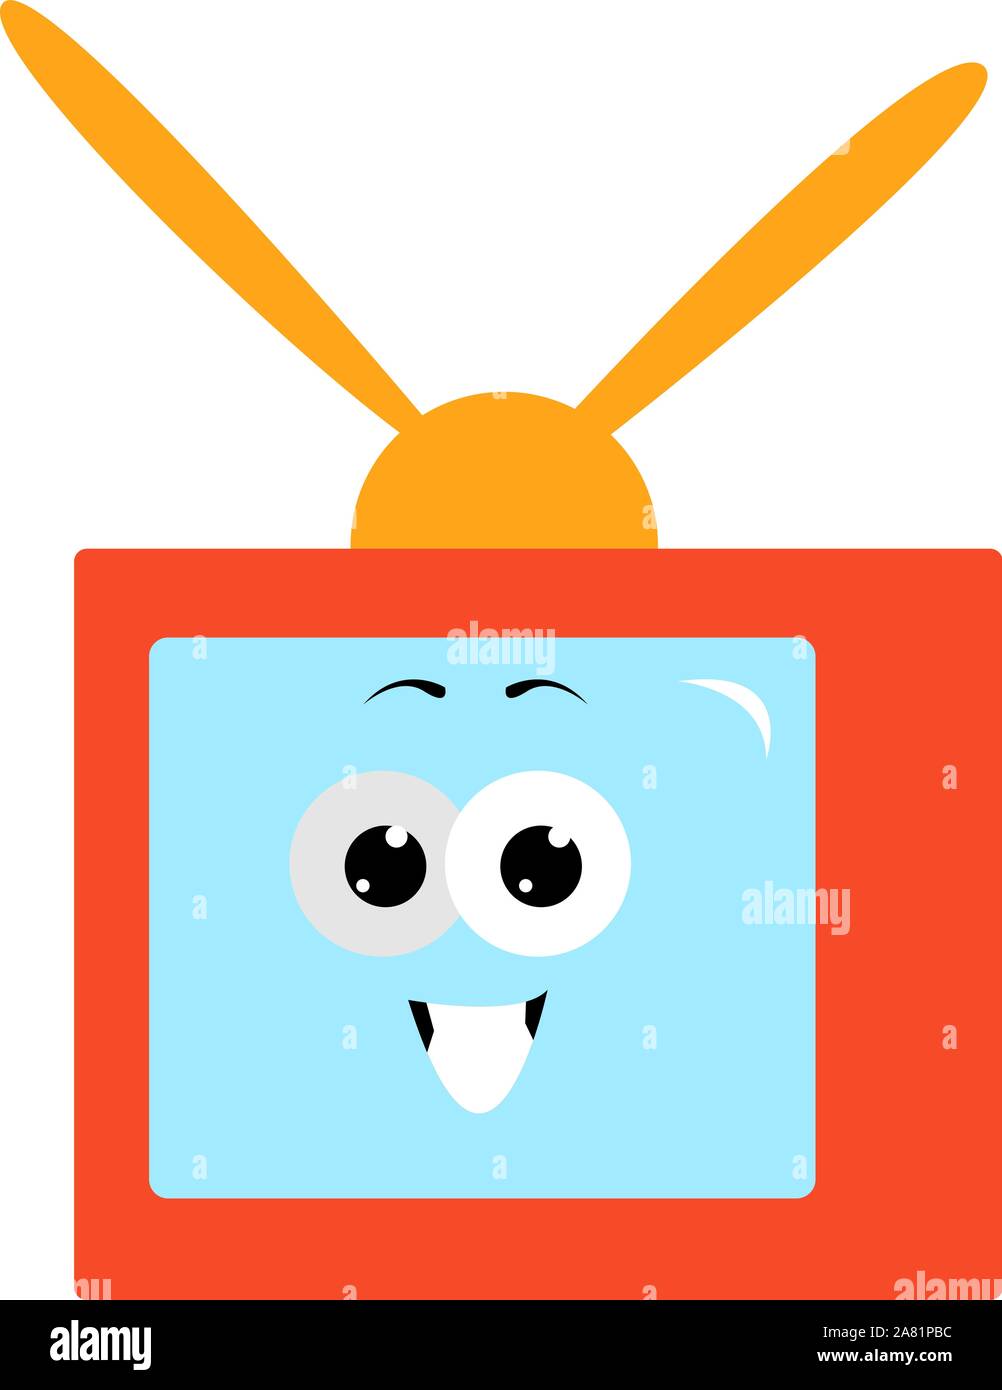 Toy tv, illustration, vector on white background. Stock Vector